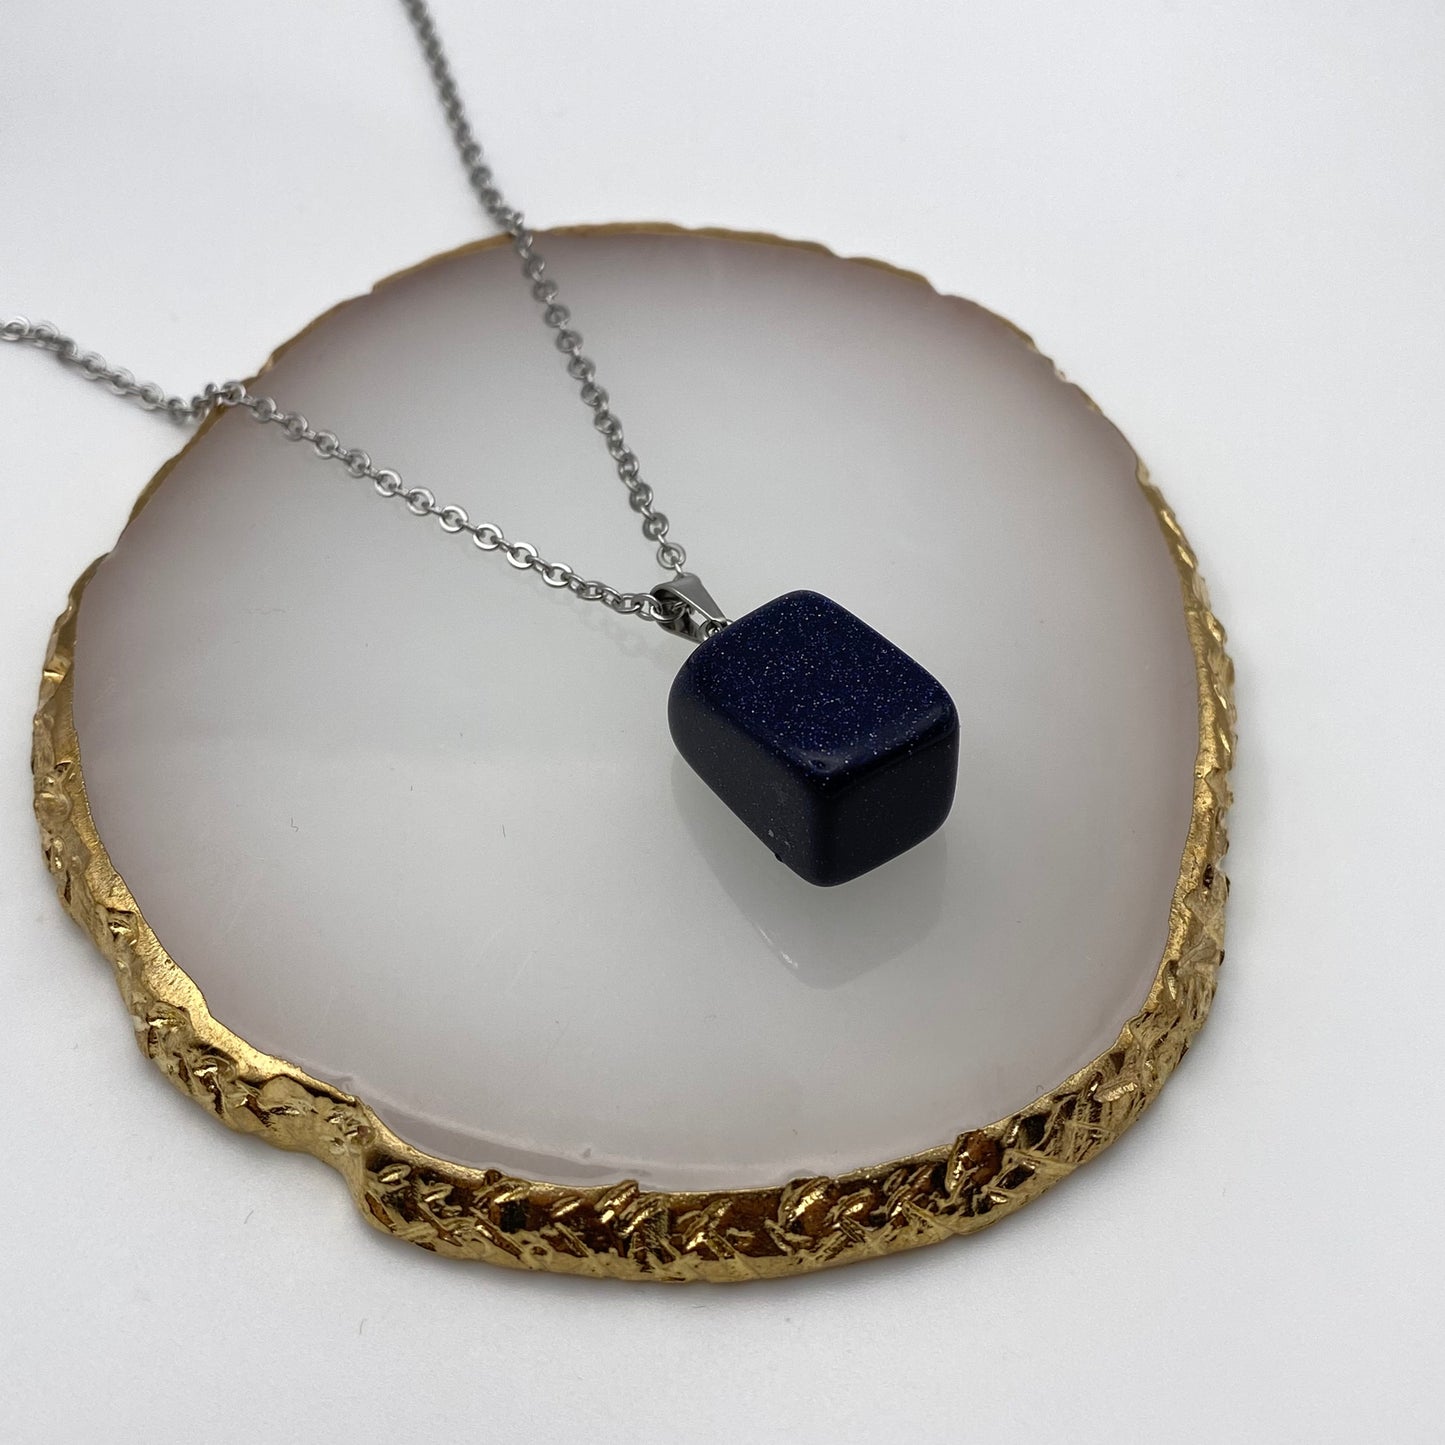 Black Sparkly Crystal Chunk Pendant Necklace